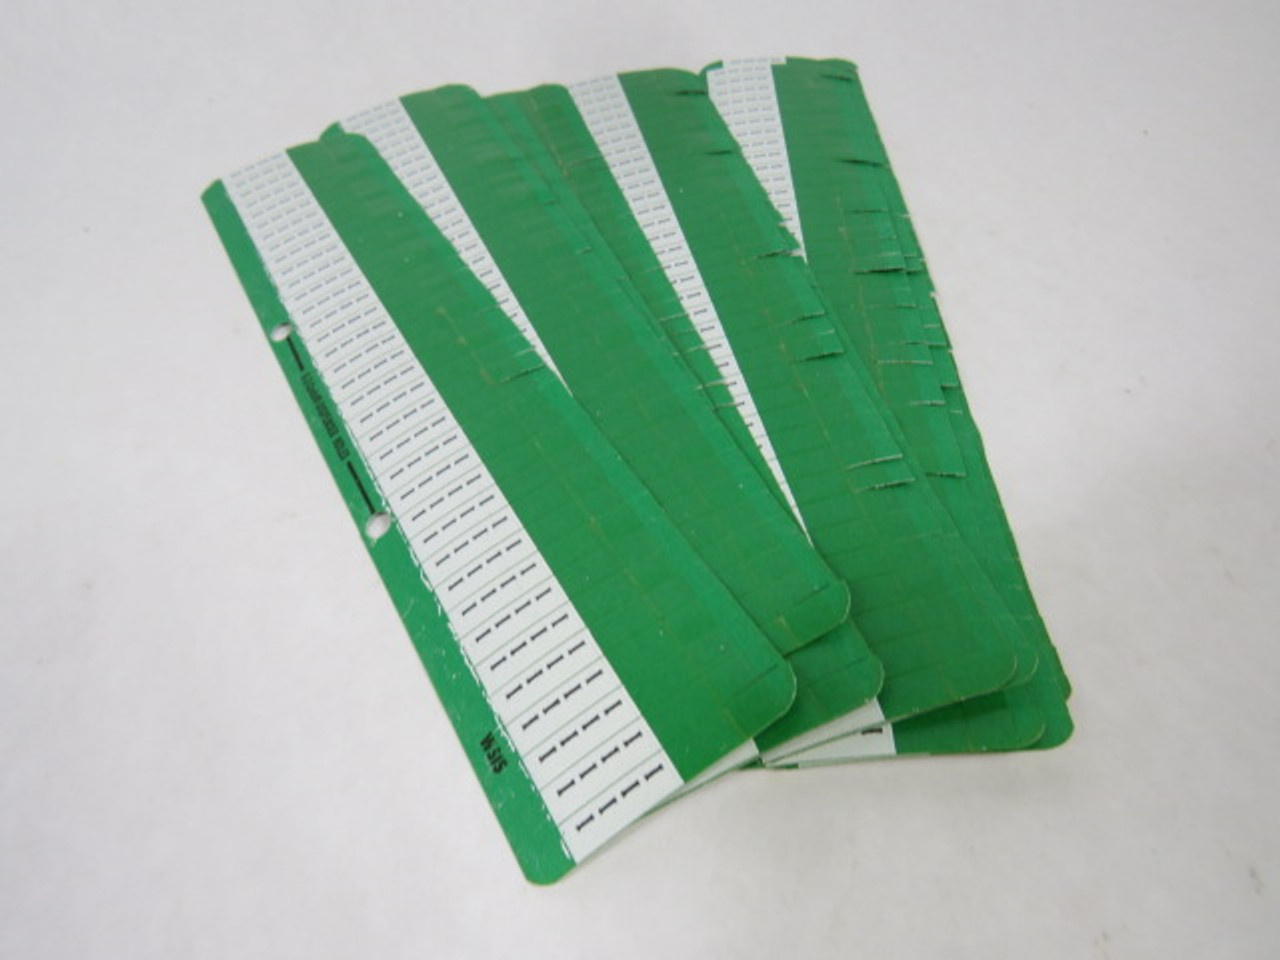 Thomas & Betts I Green E-Z-Code Wire Markers Lot of 10 ! NEW !